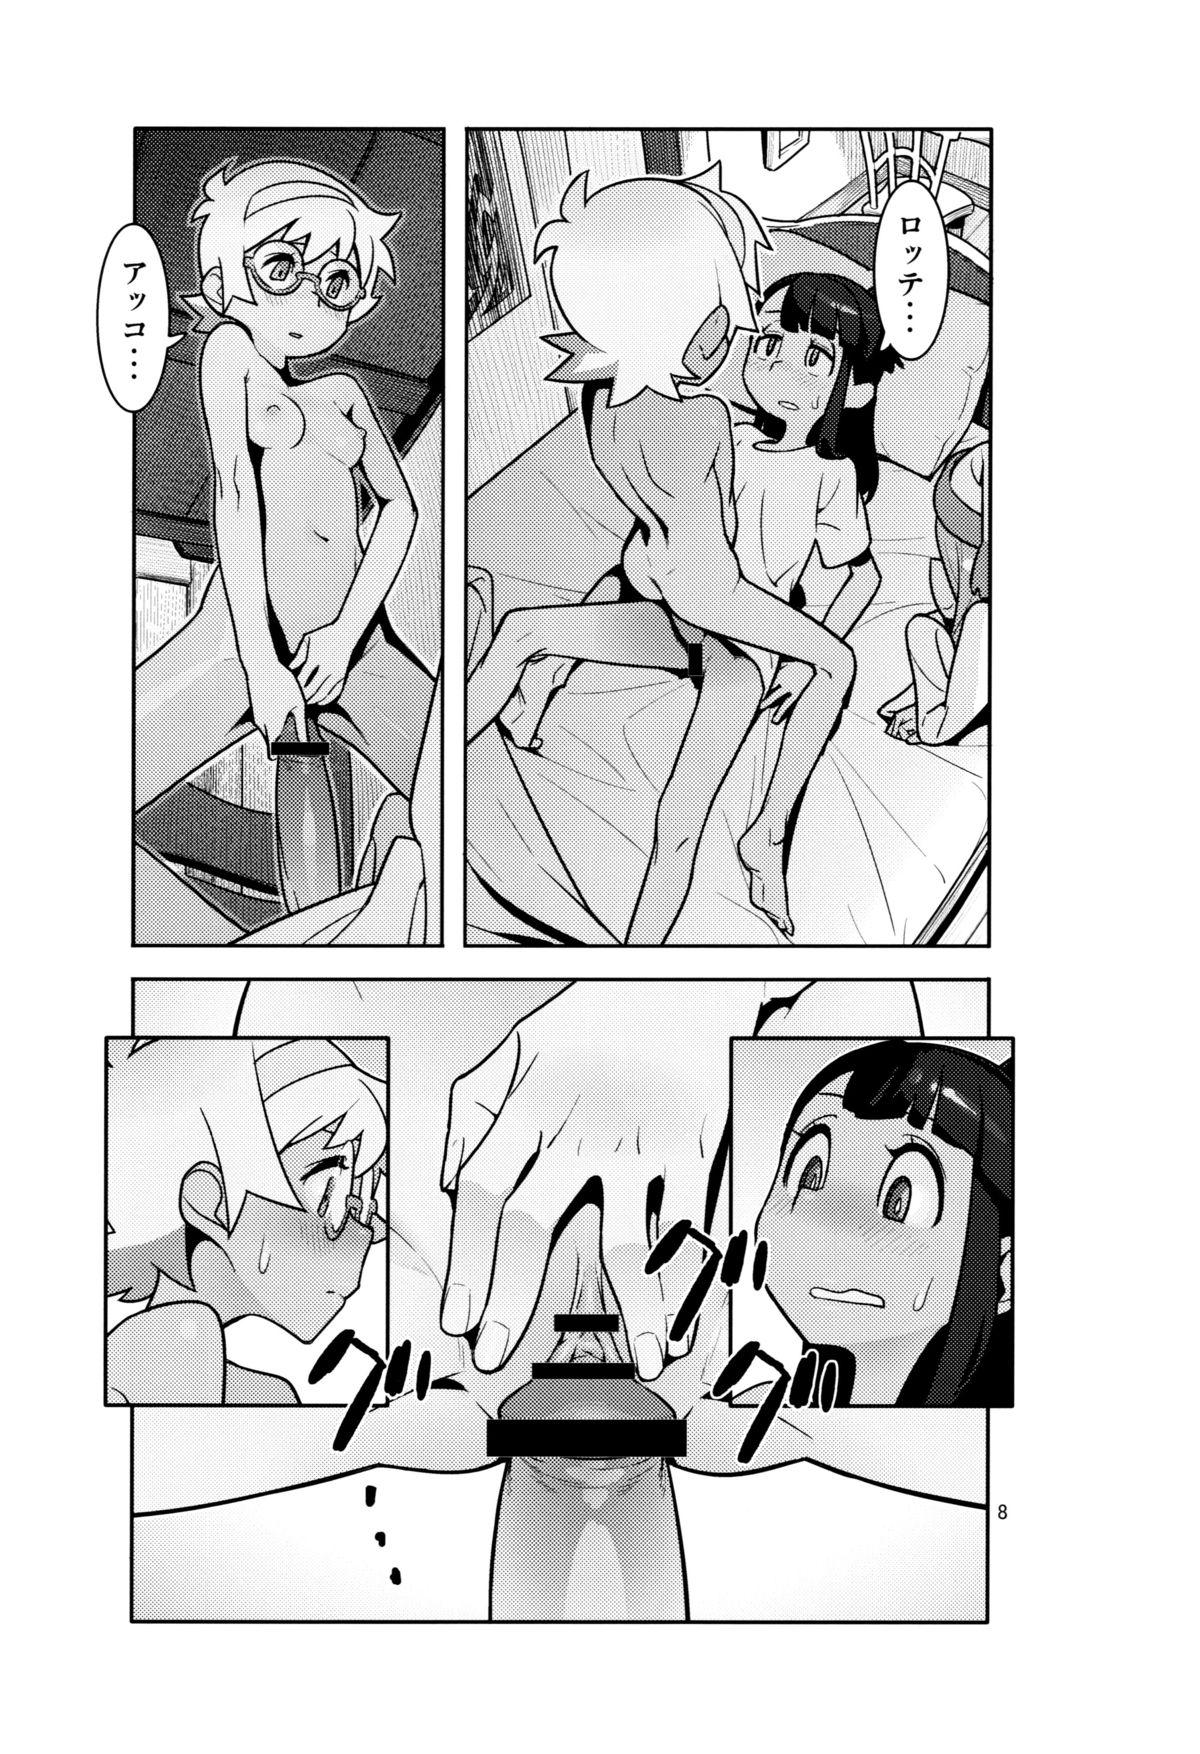 Safada B=Witch! - Little witch academia Polla - Page 7